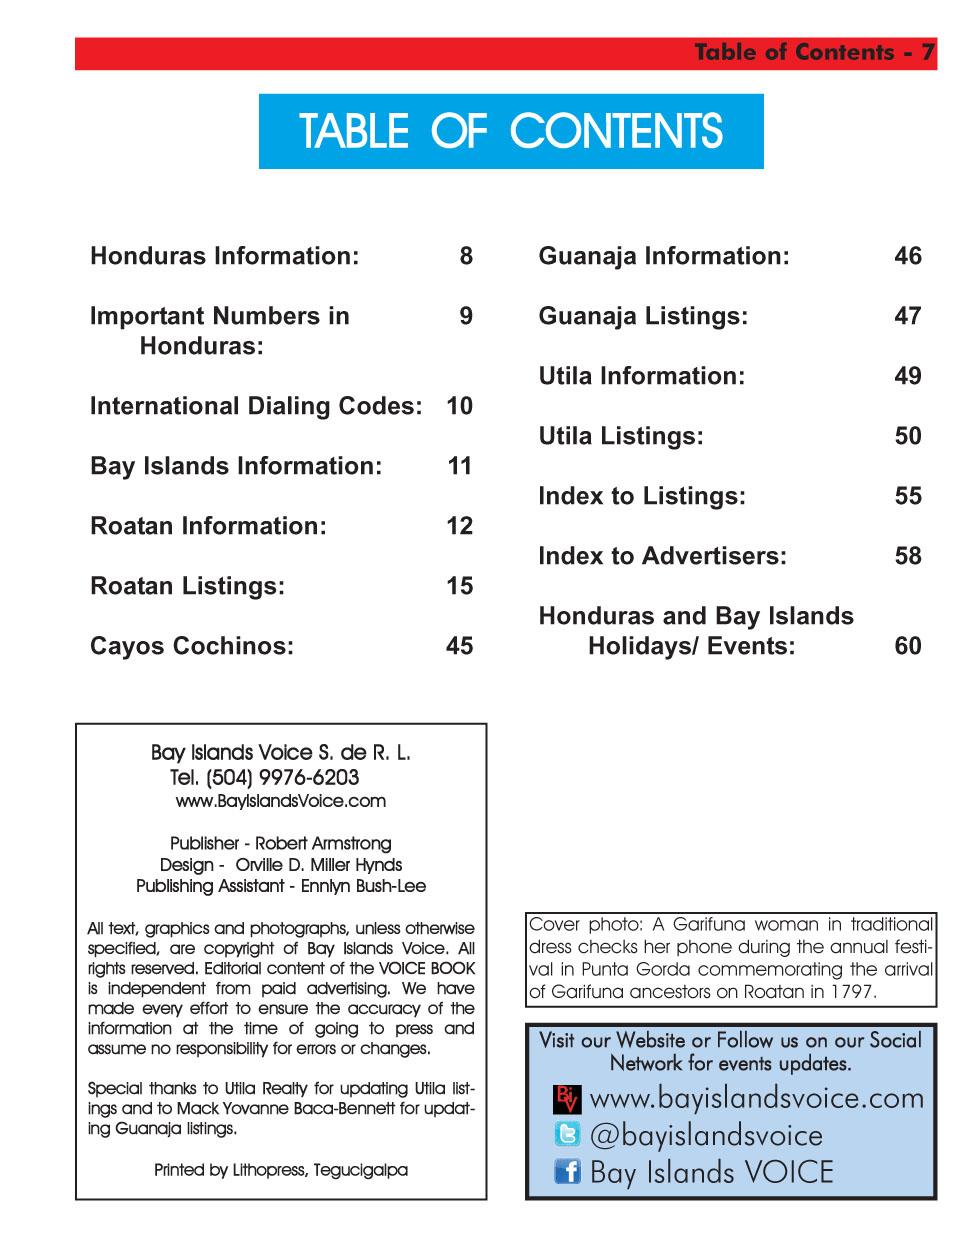 TABLE OF CONTENTS Honduras Information: 8 Guanaja Information: 46 Important Numbers in 9 Guanaja Listings: 47 Honduras: Utila Information: 49 International Dialing Codes: 10 Utila Listings: 50 Bay